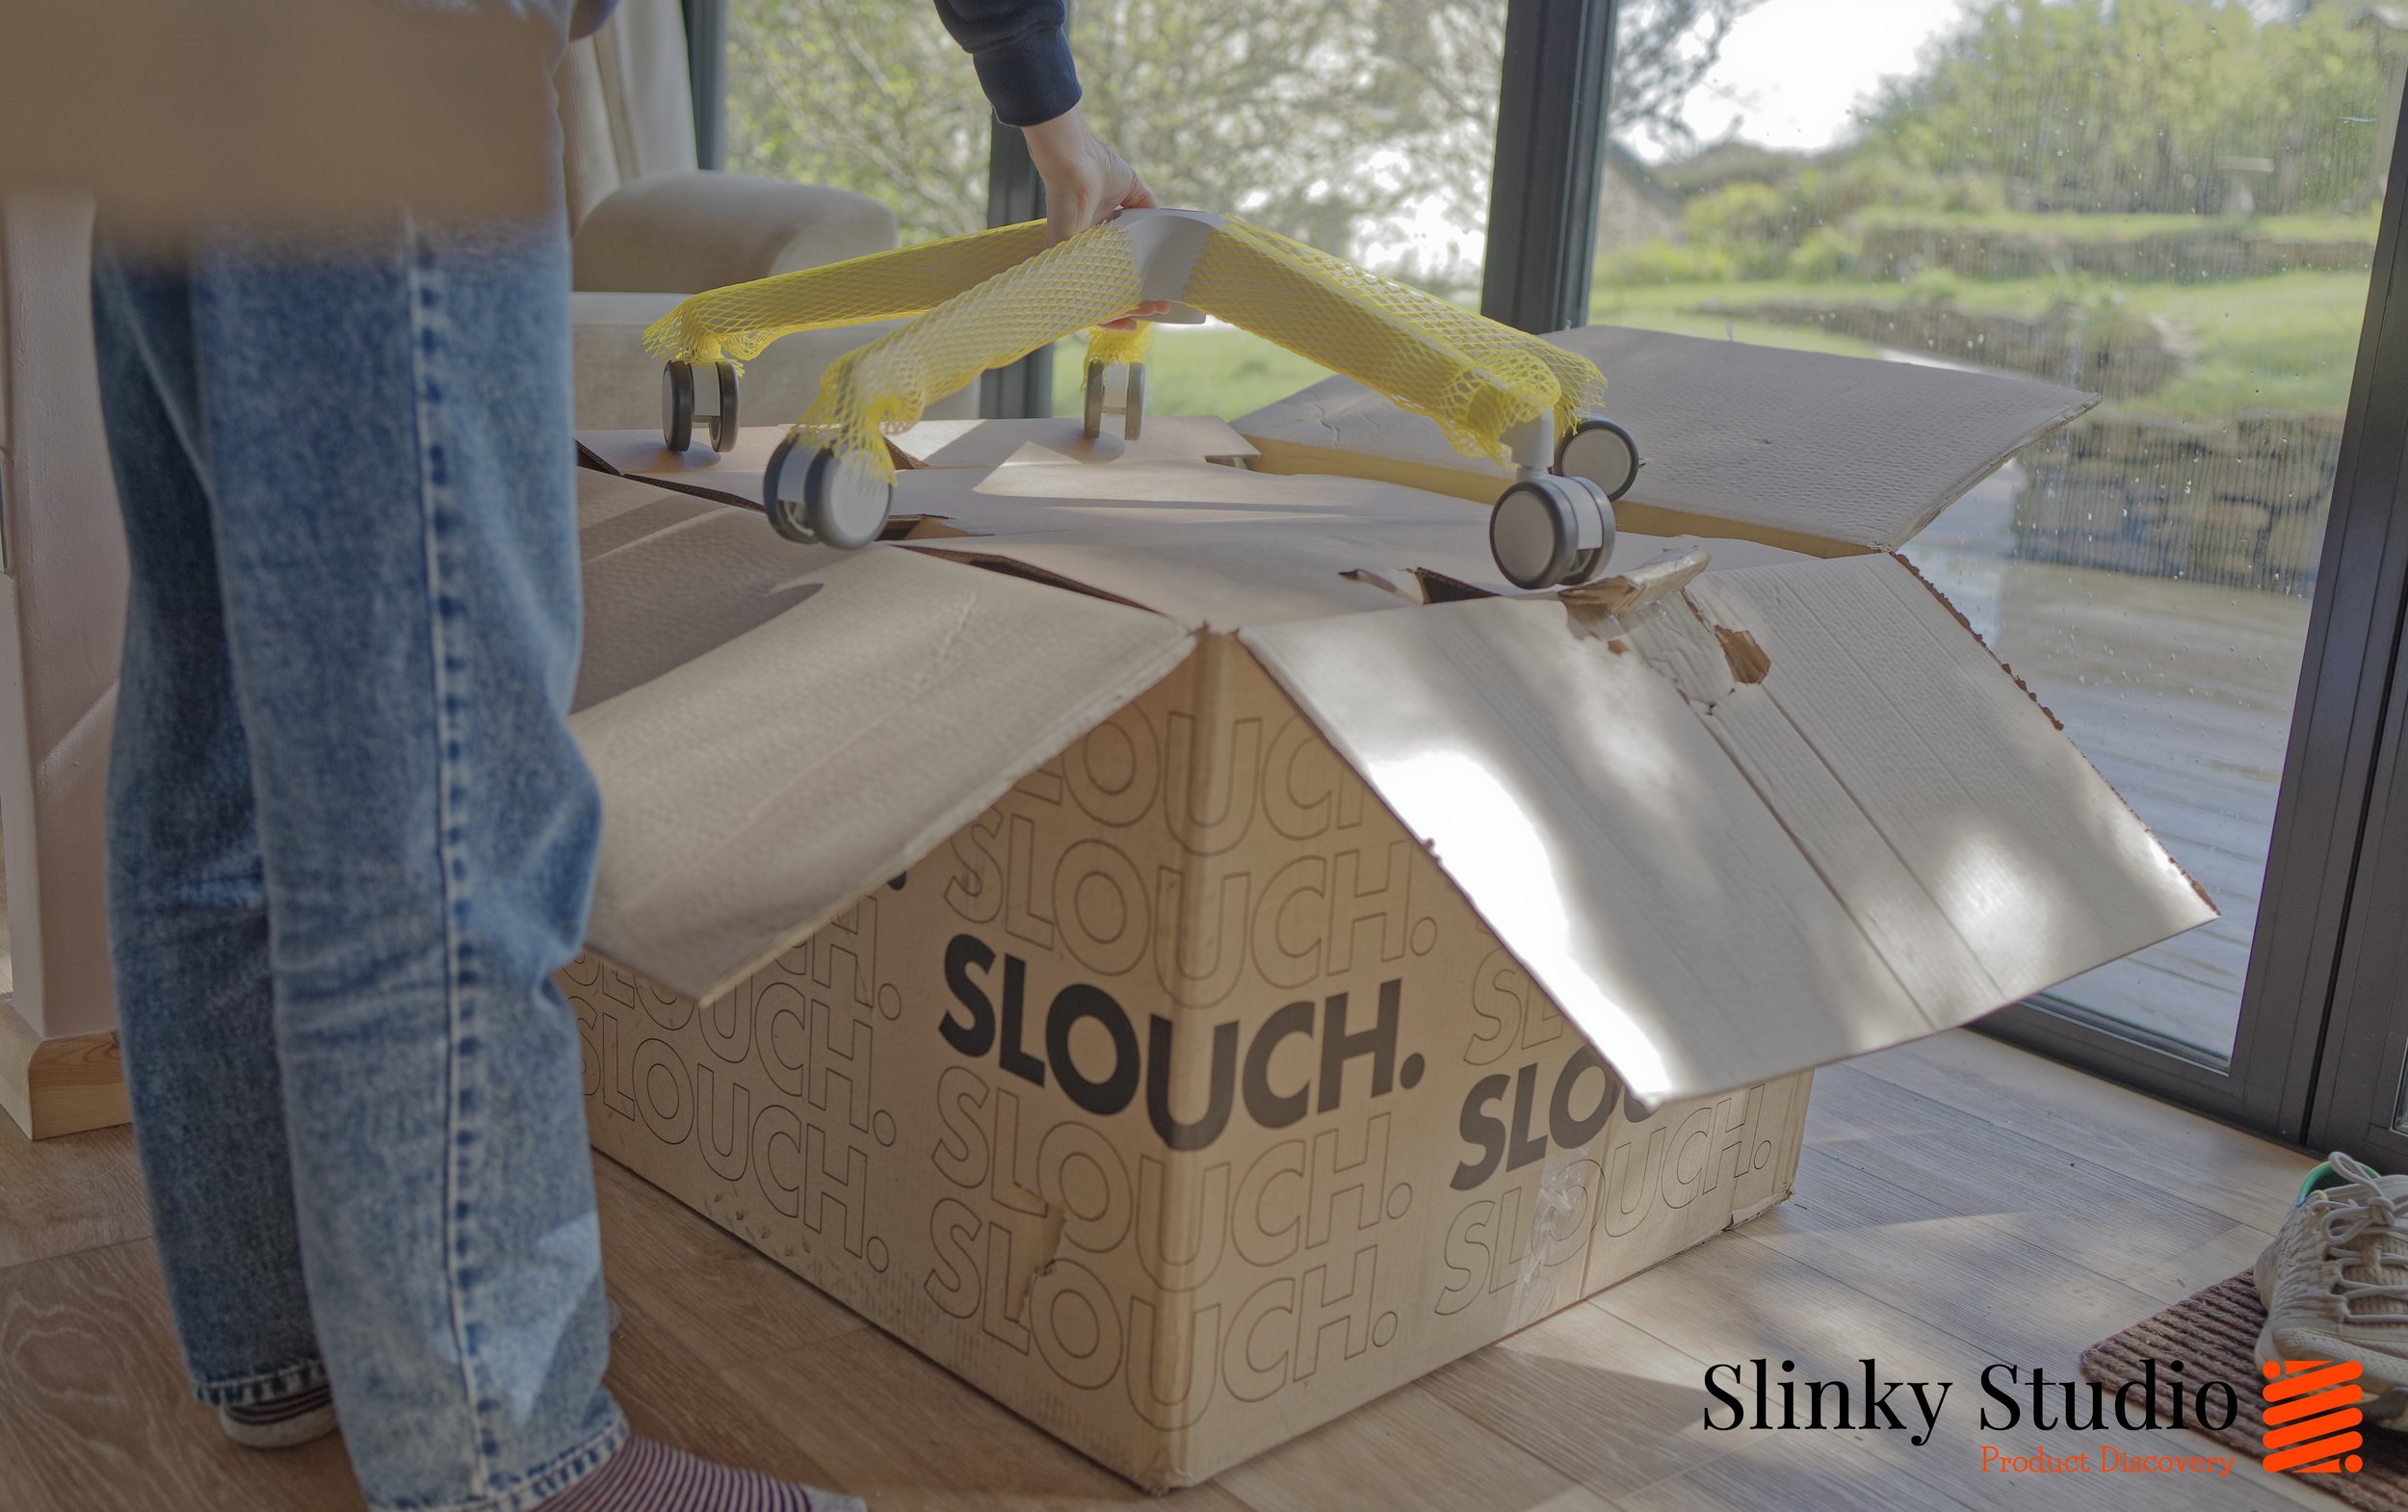 Slouch Task One Chair Unboxing.jpg